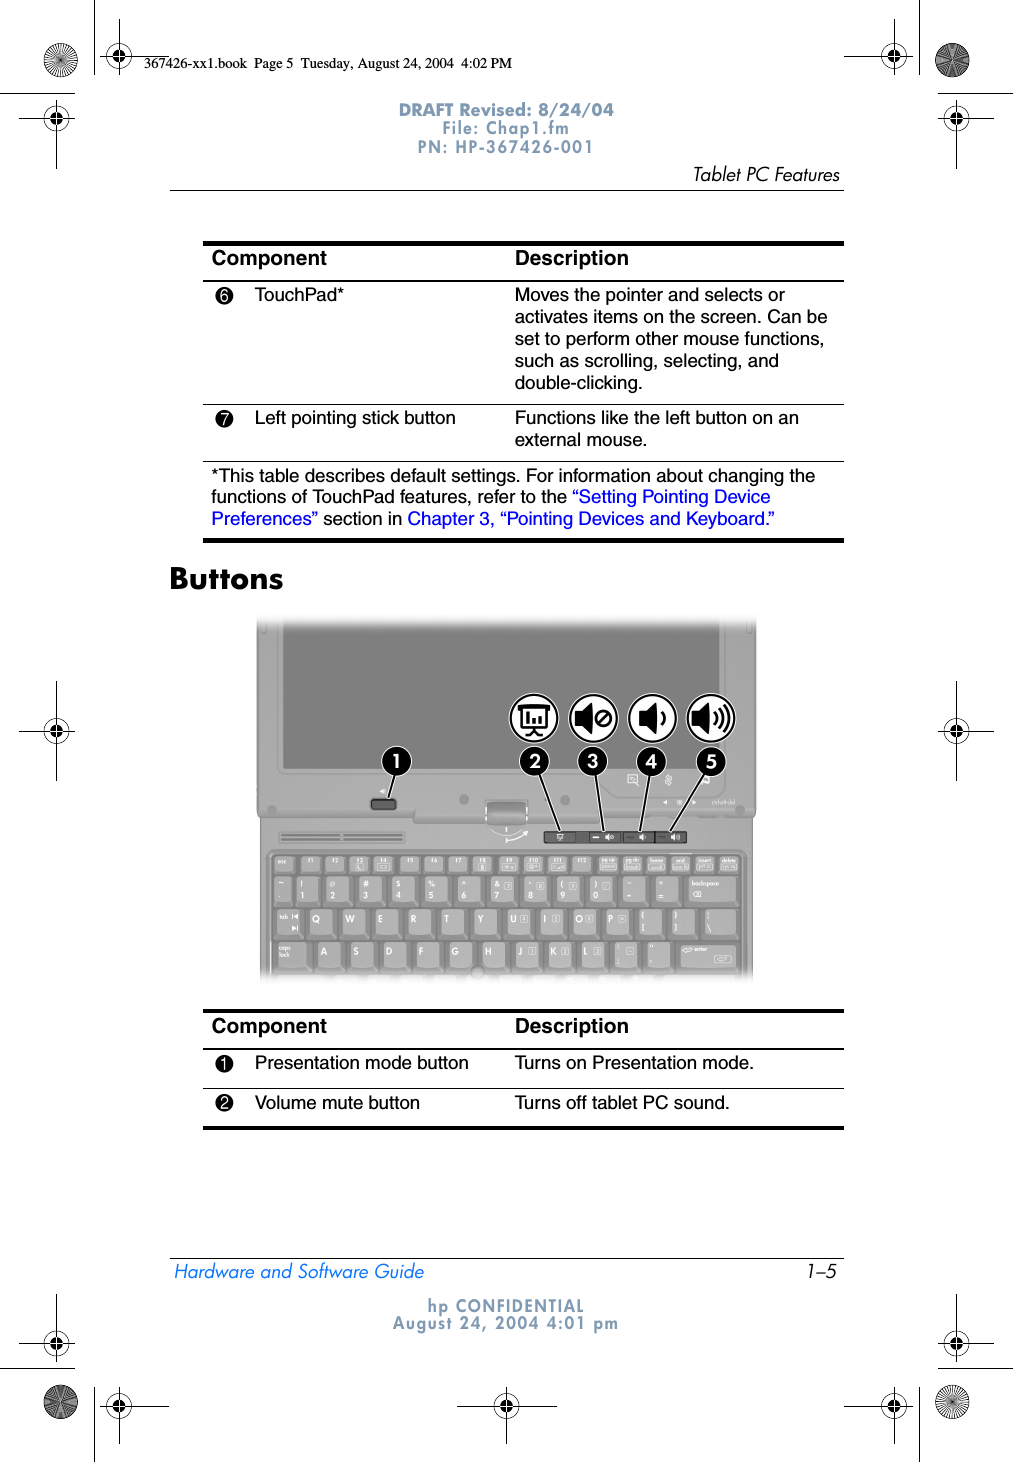 Tablet PC FeaturesHardware and Software Guide 1–5DRAFT Revised: 8/24/04File: Chap1.fm PN: HP-367426-001 hp CONFIDENTIALAugust 24, 2004 4:01 pmButtons6TouchPad* Moves the pointer and selects or activates items on the screen. Can be set to perform other mouse functions, such as scrolling, selecting, and double-clicking.7Left pointing stick button Functions like the left button on an external mouse.*This table describes default settings. For information about changing the functions of TouchPad features, refer to the “Setting Pointing Device Preferences” section in Chapter 3, “Pointing Devices and Keyboard.”Component DescriptionComponent Description1Presentation mode button Turns on Presentation mode.2Volume mute button Turns off tablet PC sound.367426-xx1.book  Page 5  Tuesday, August 24, 2004  4:02 PM